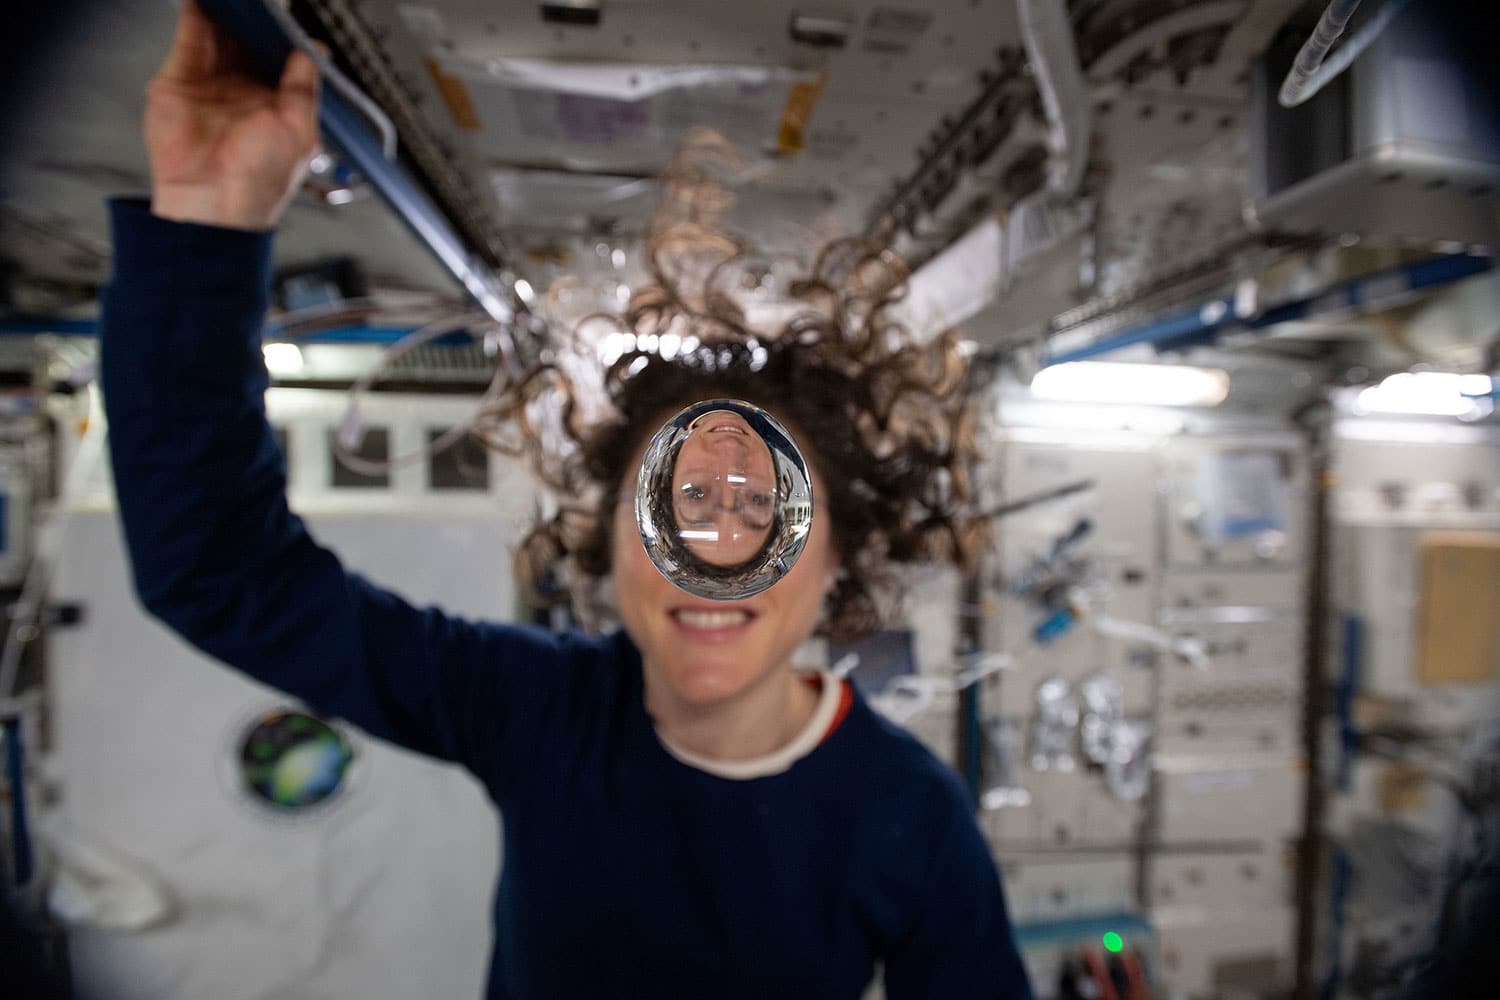 NASA system converts astronaut pee and sweat into drinking water on ISS.